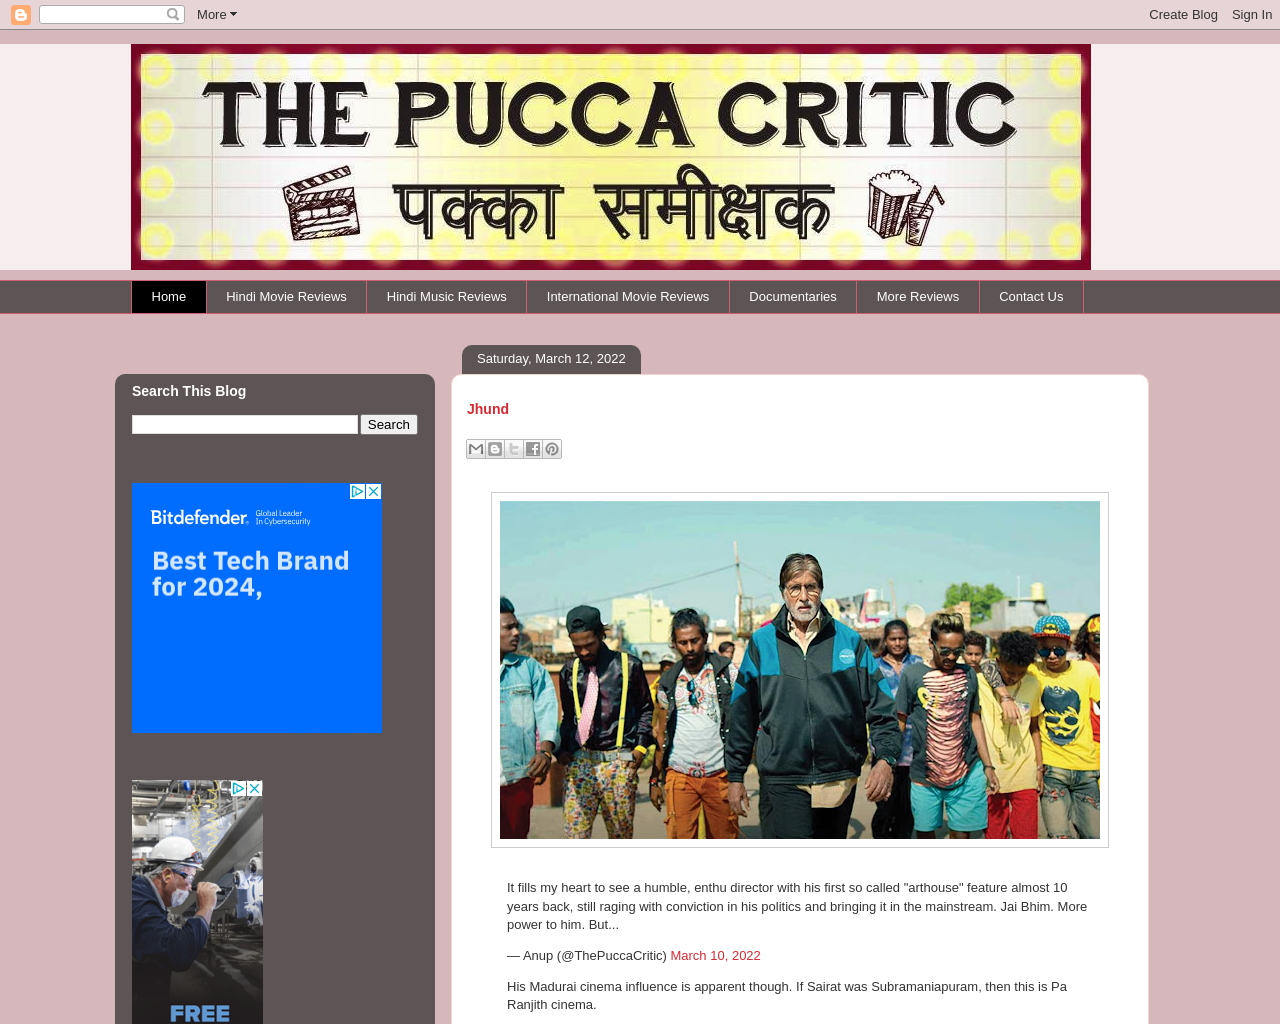 The Pucca Critic